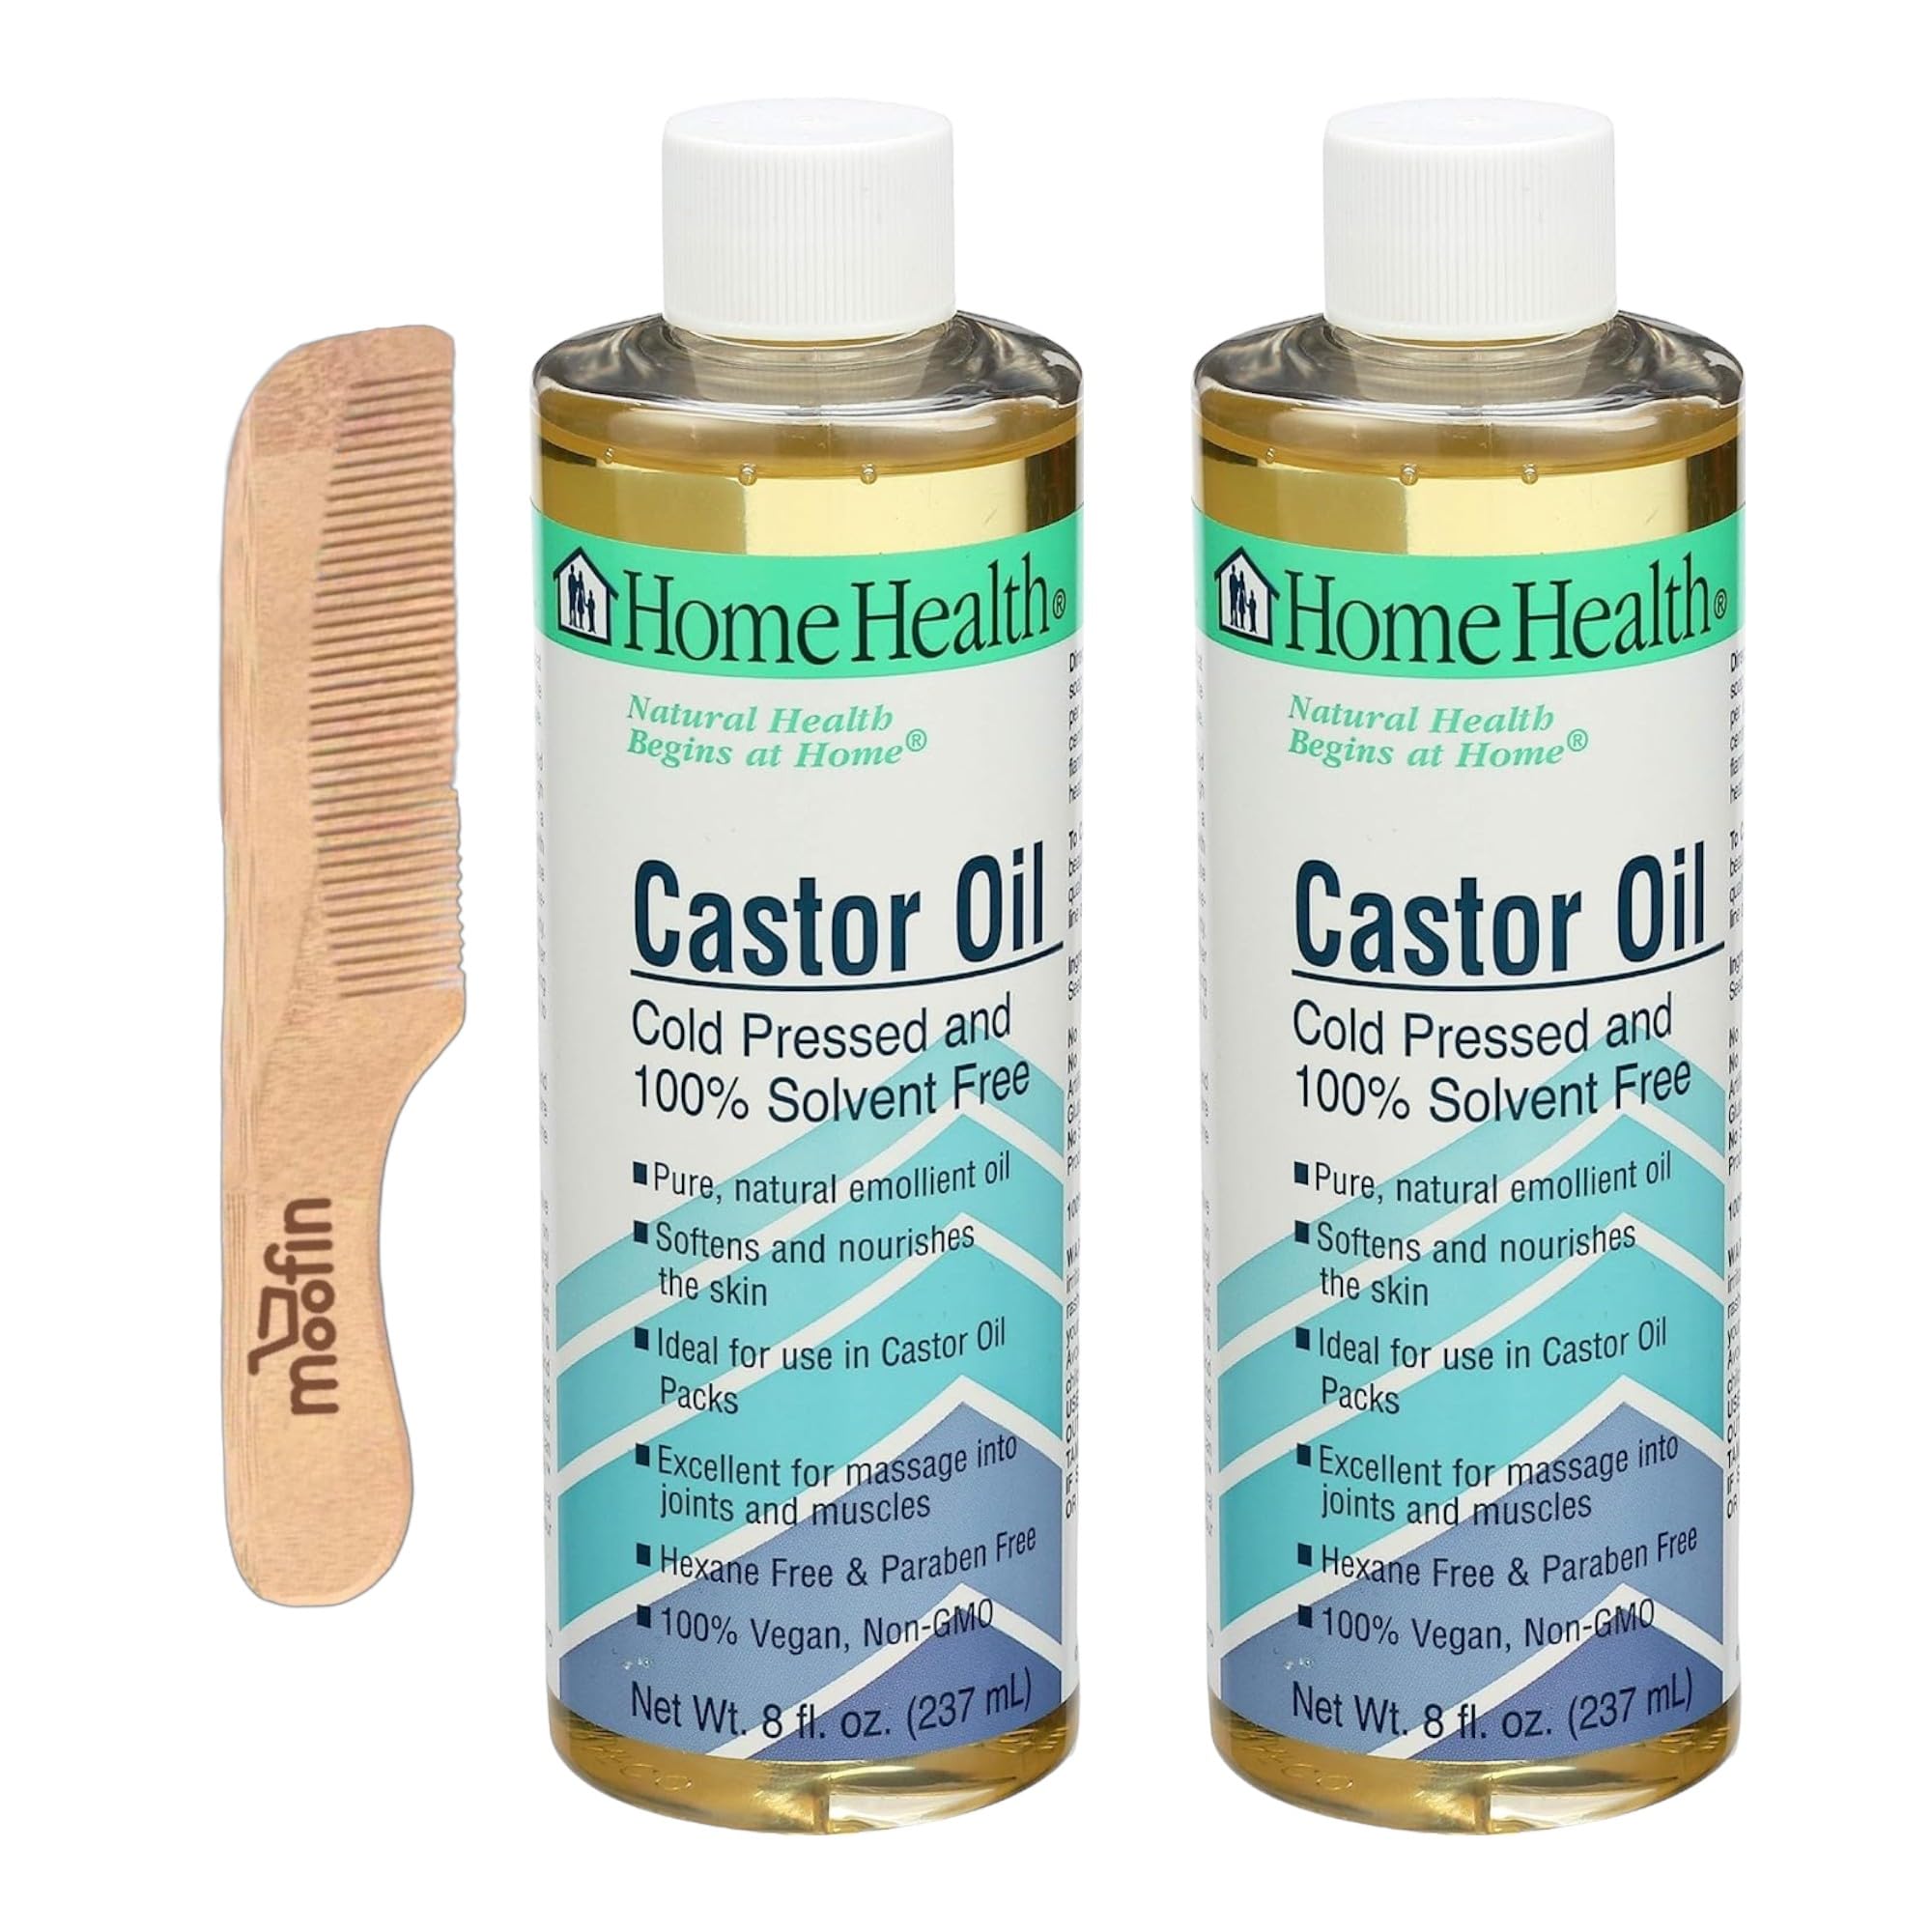 moofin Home Health Castor Oil Cold Pressed, 8 Fl Oz Wooden Comb - Castor Oil Hexane Free, Pure Castor Oil for Hair Growth and Skin, Natural, Paraben-Free, Ideal for All Hair Types (Pack of 2)